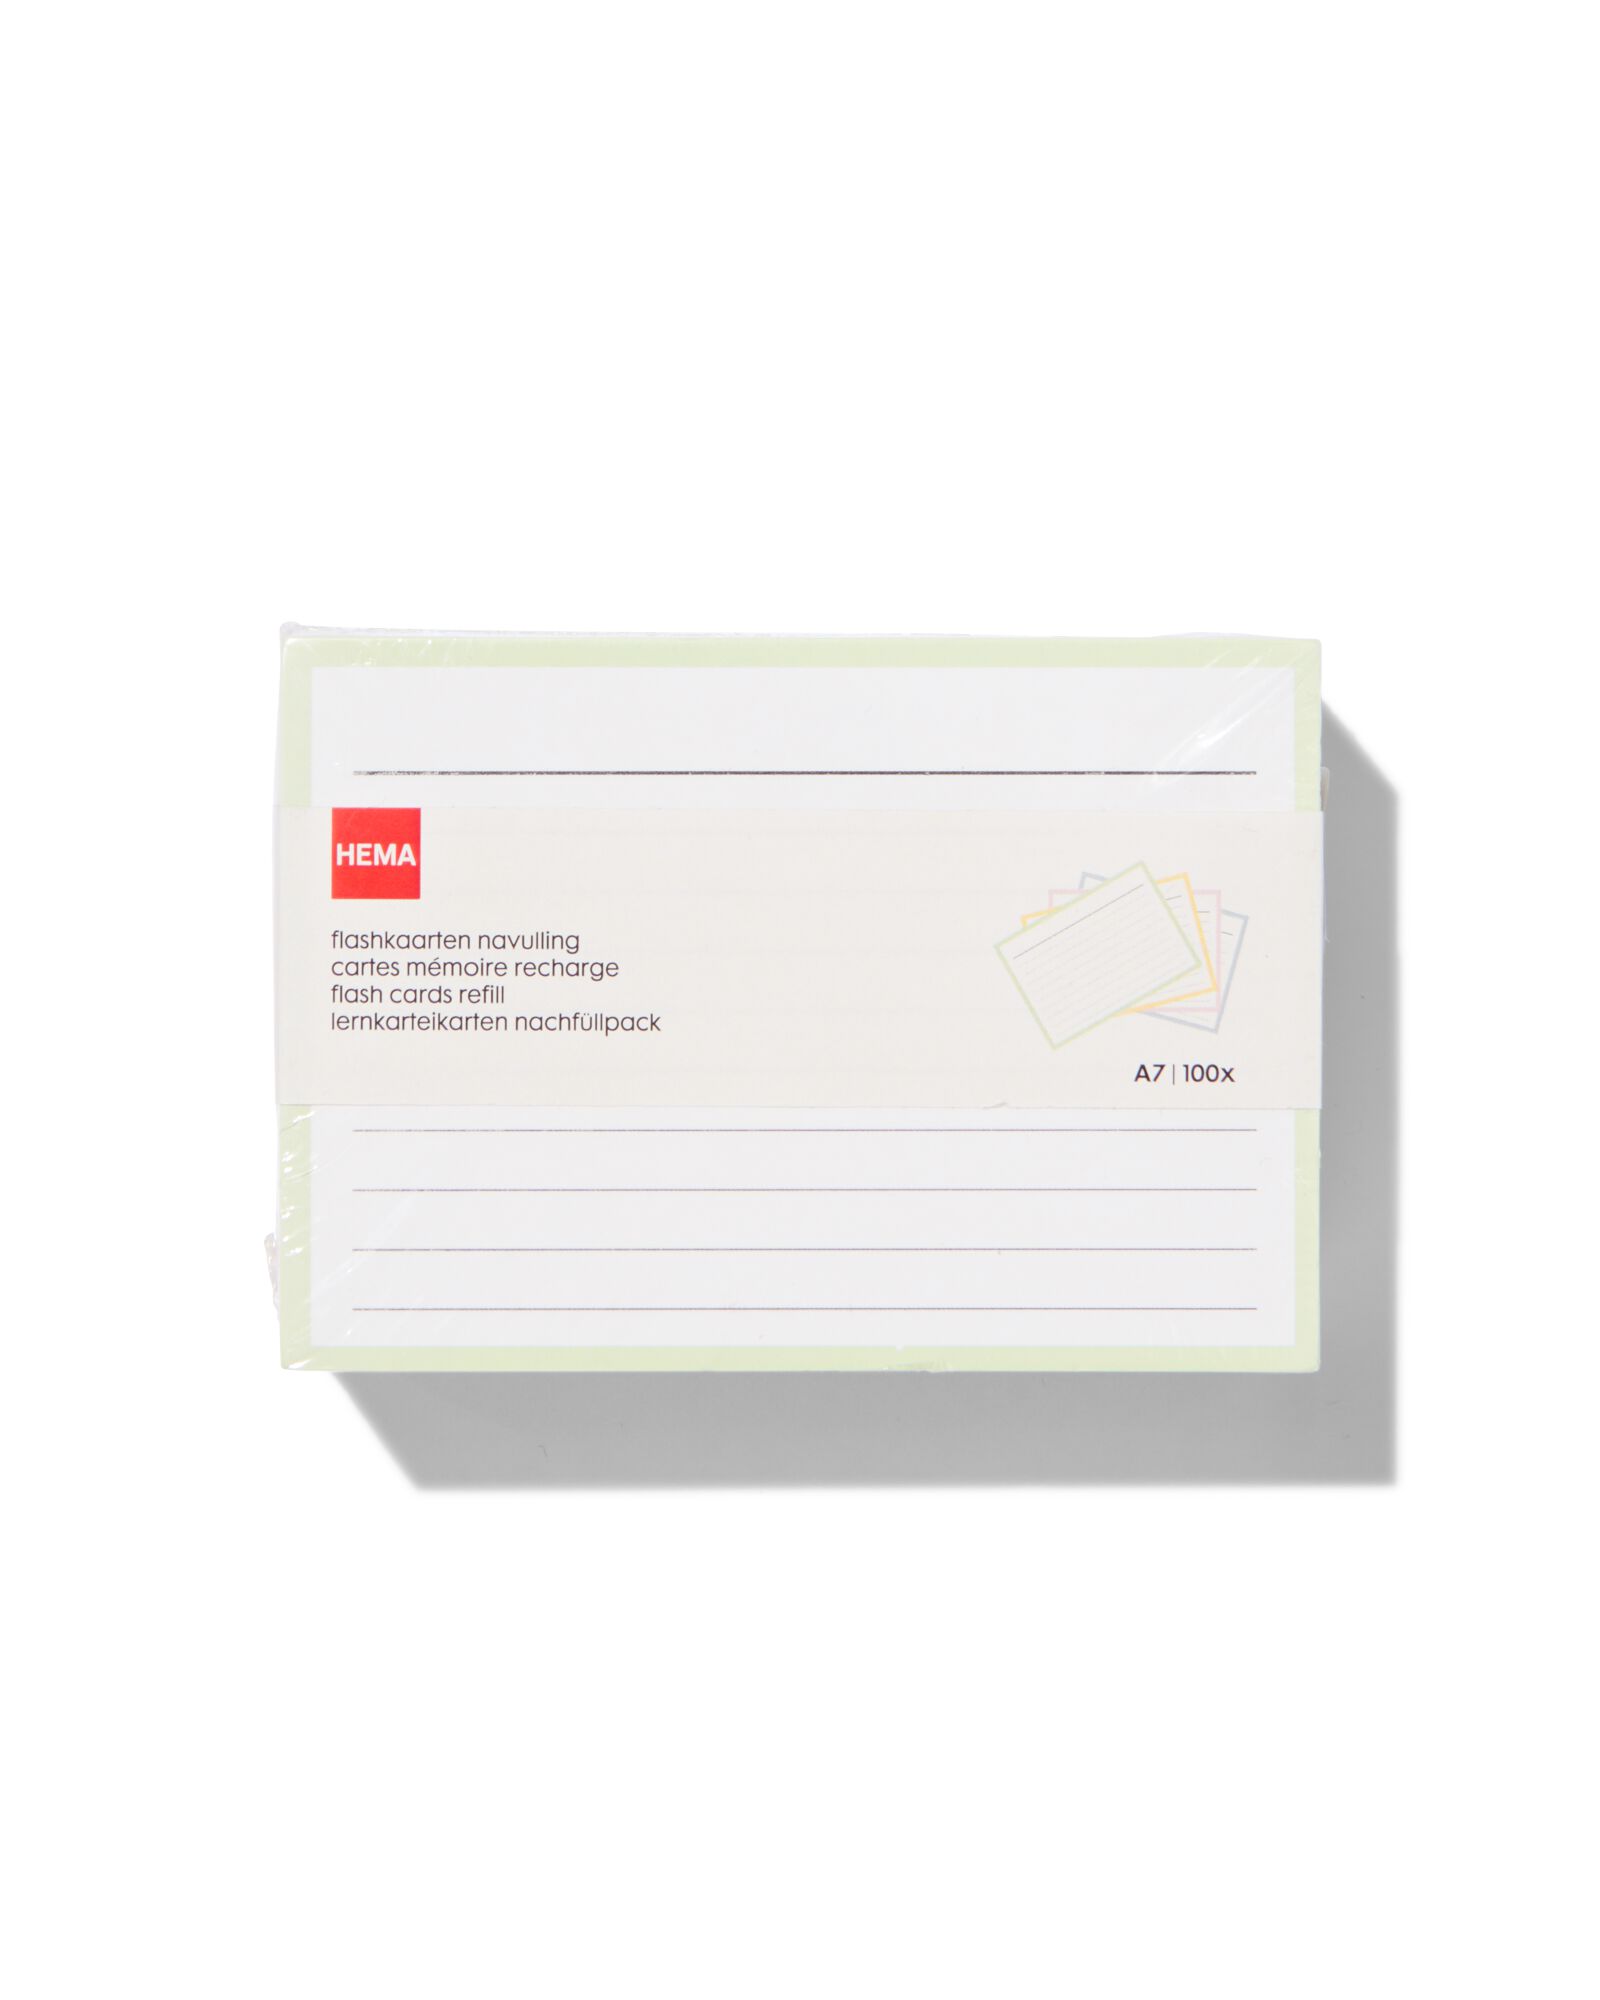 100 flashcards A7 recharge - HEMA